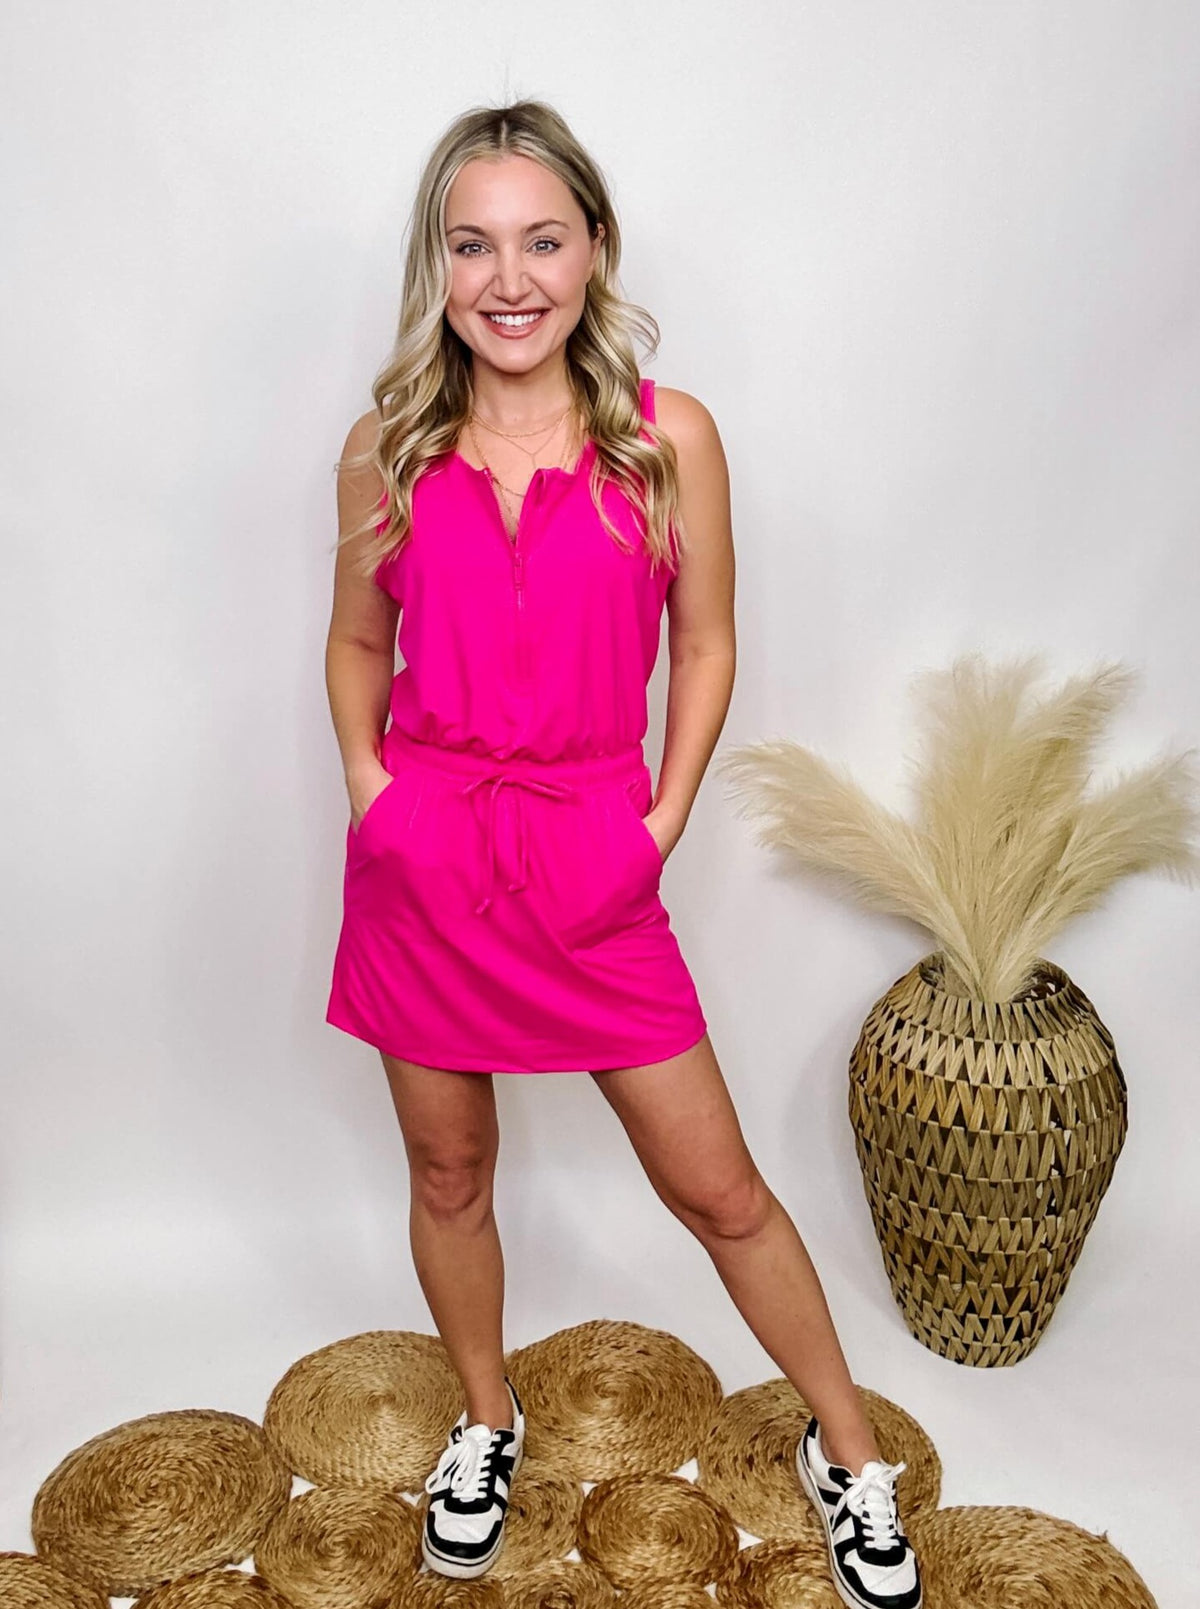 Rae Mode Hot Pink Romper Dress Built in Biker Shorts Elastic Drawstring Waist Functioning Zipper Side Pockets Stretchy Buttery Soft Material True to Size 84% Poly Microfiber 16% Spandex